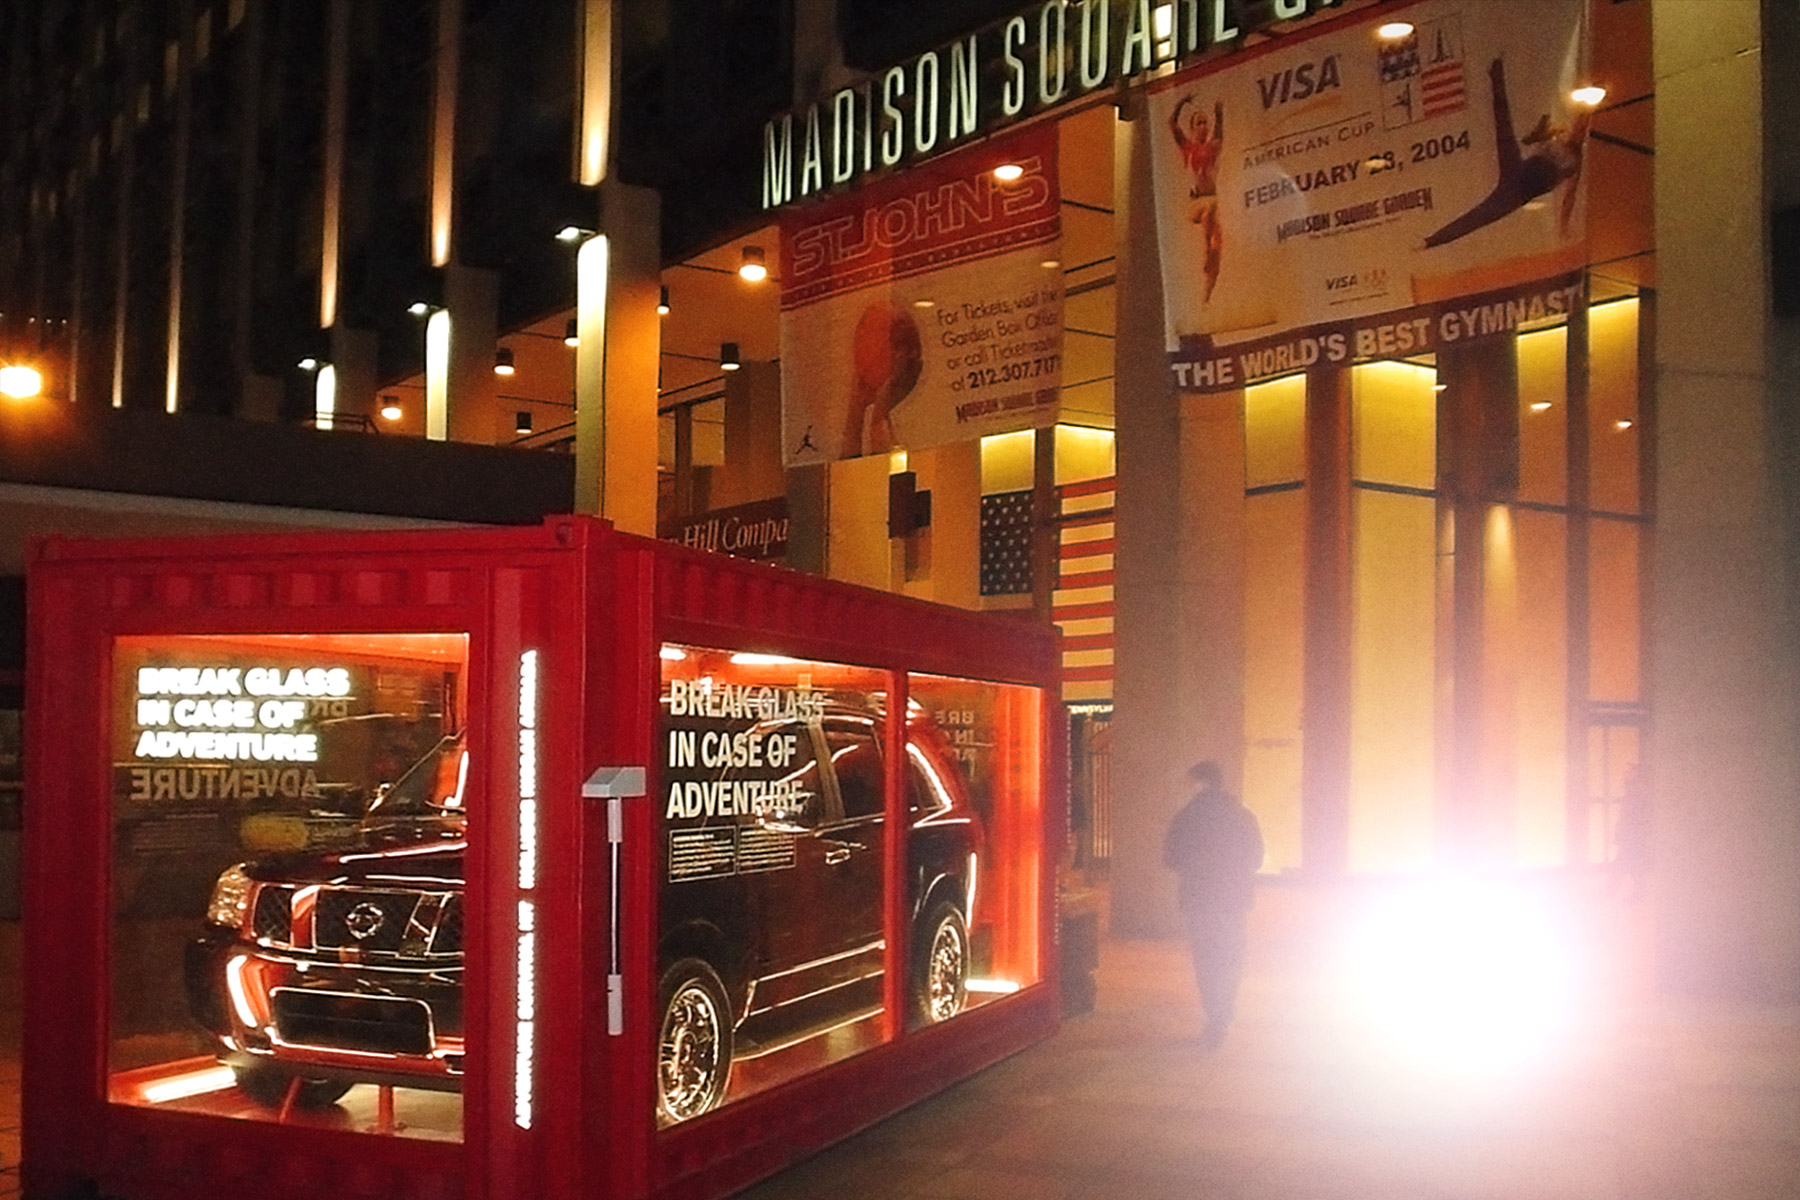 Pop up shops and advertising vending machines